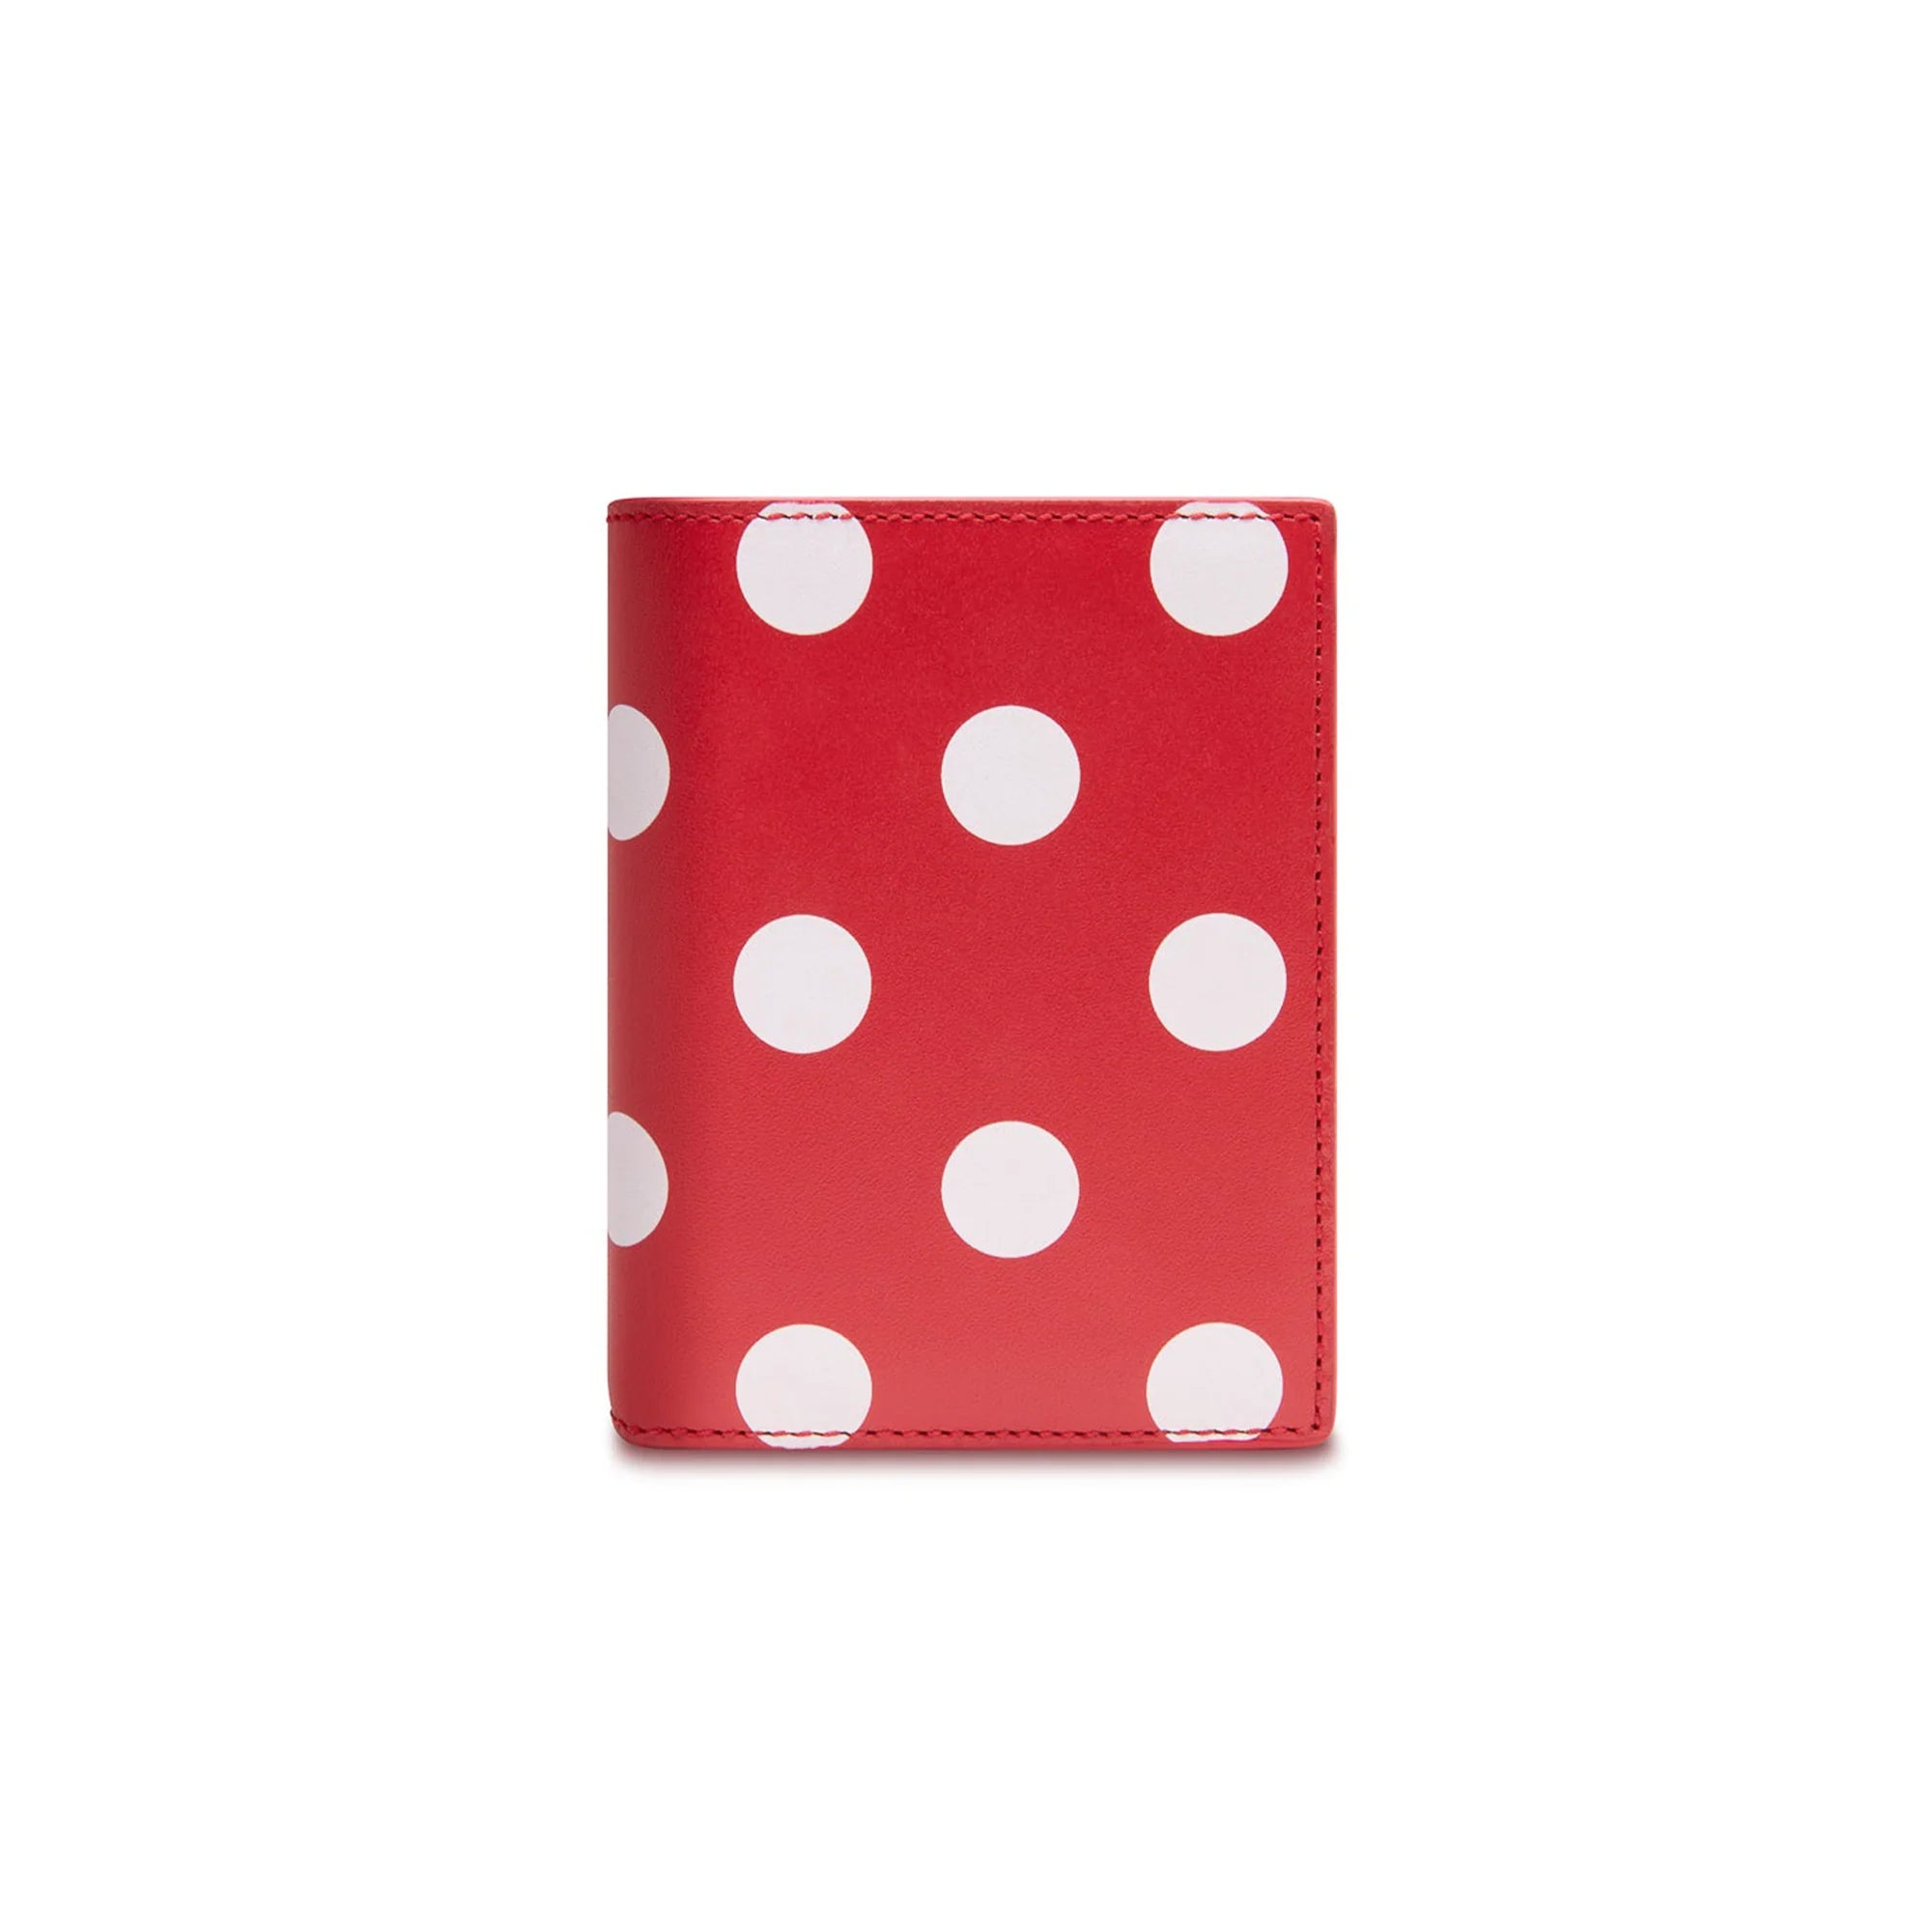 Comme Des Garcons Polka Dots Printed 'RED'